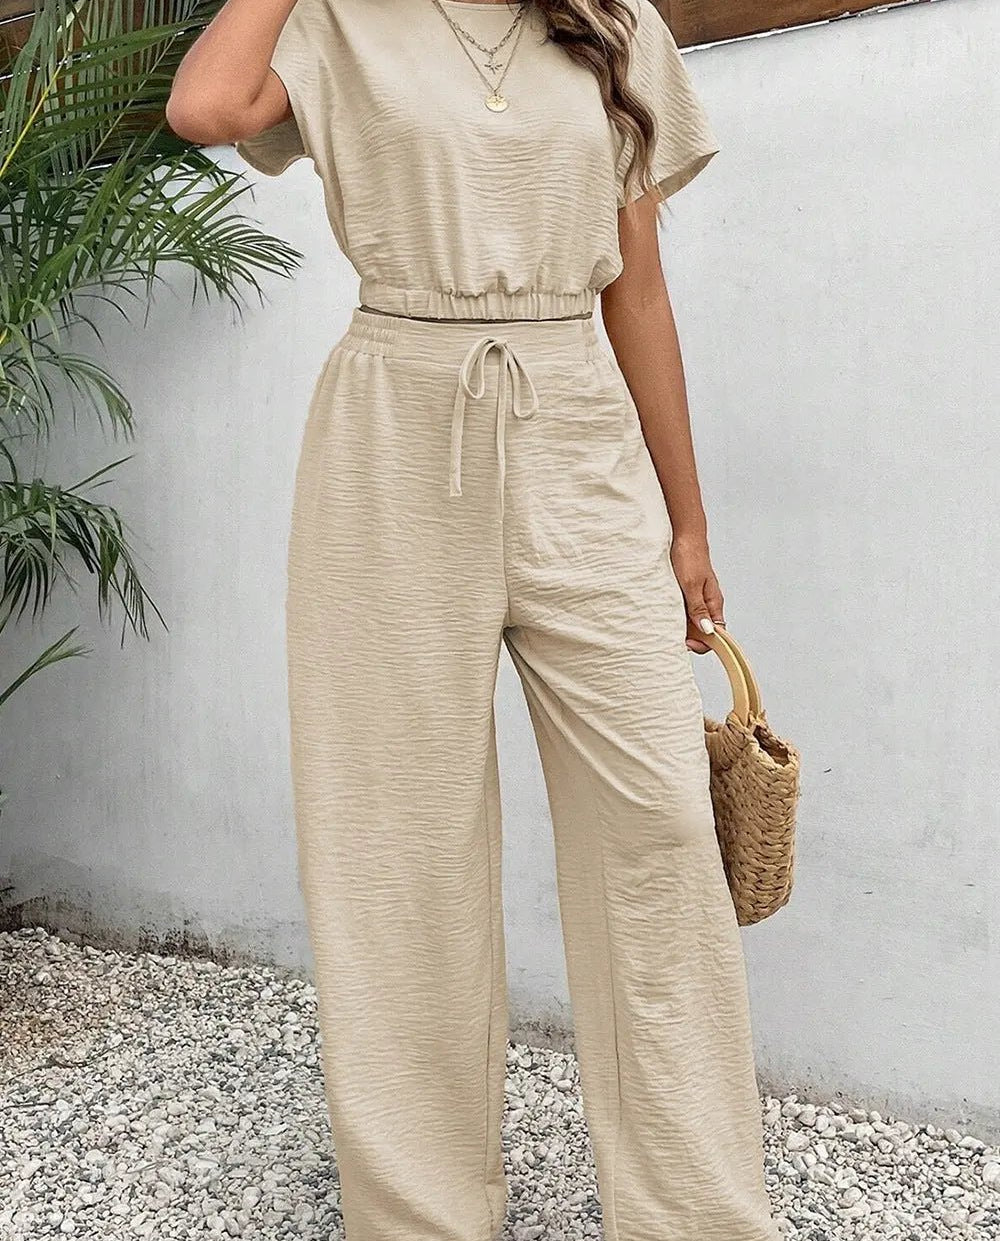 SHORT SLEEVE TWO-PIECE SUMMER OUTFIT - MeadeuxSHORT SLEEVE TWO-PIECE SUMMER OUTFITTwo Piece SetMeadeux